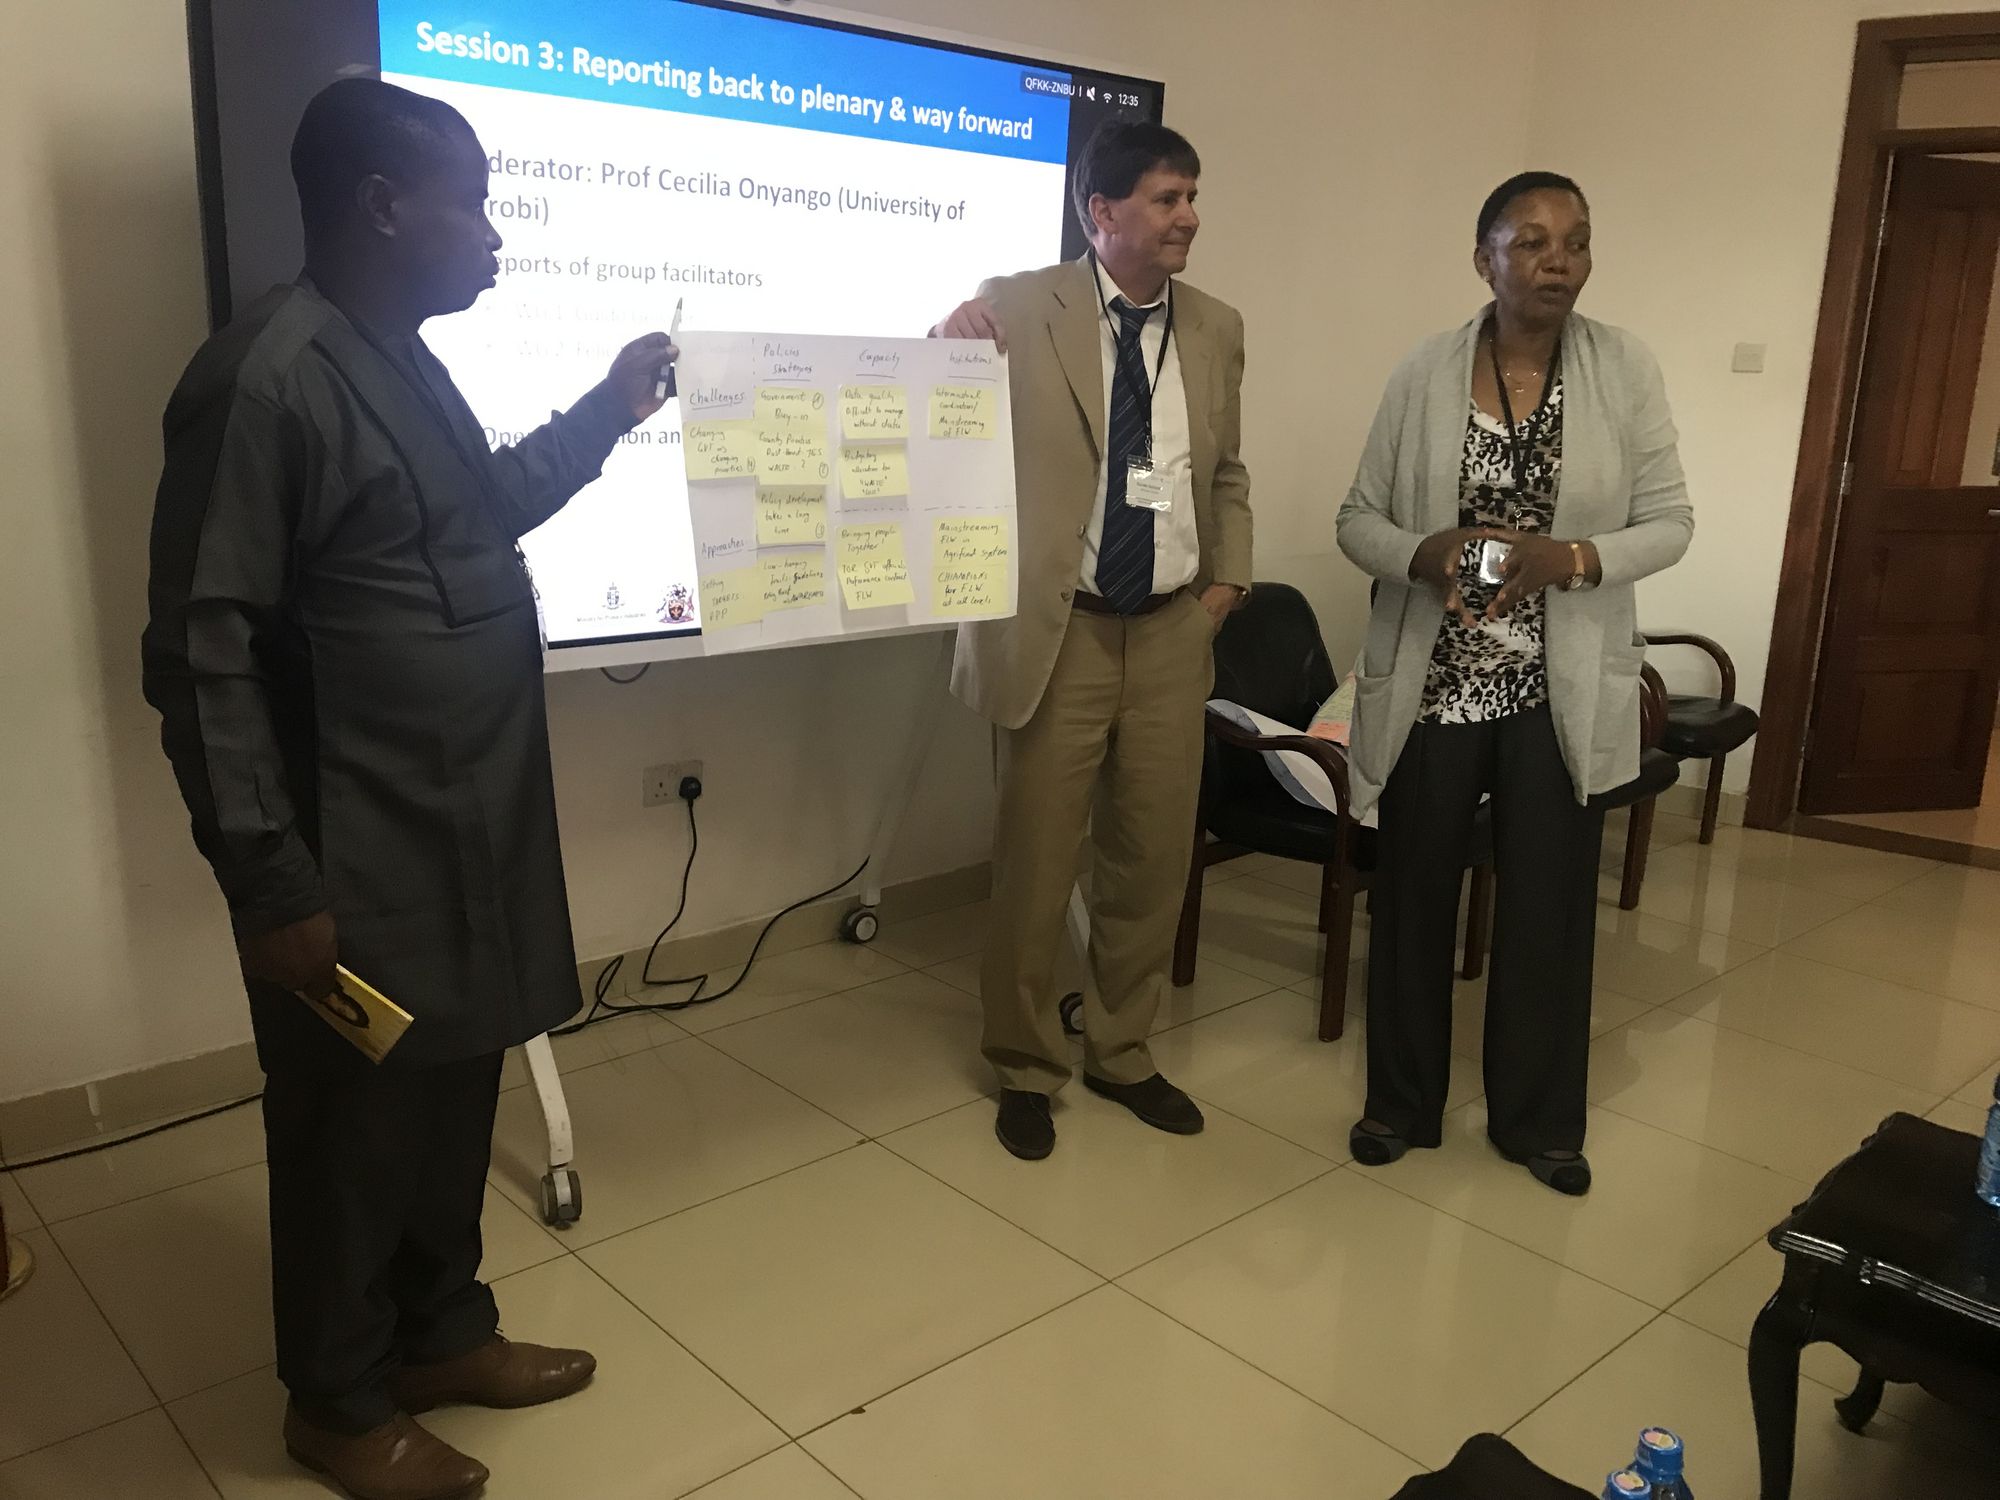 Mr Abiodun Aderibigbe, Mr Guido Geissler, and Mrs Daphne Muchai share the findings of the group work related to policies.